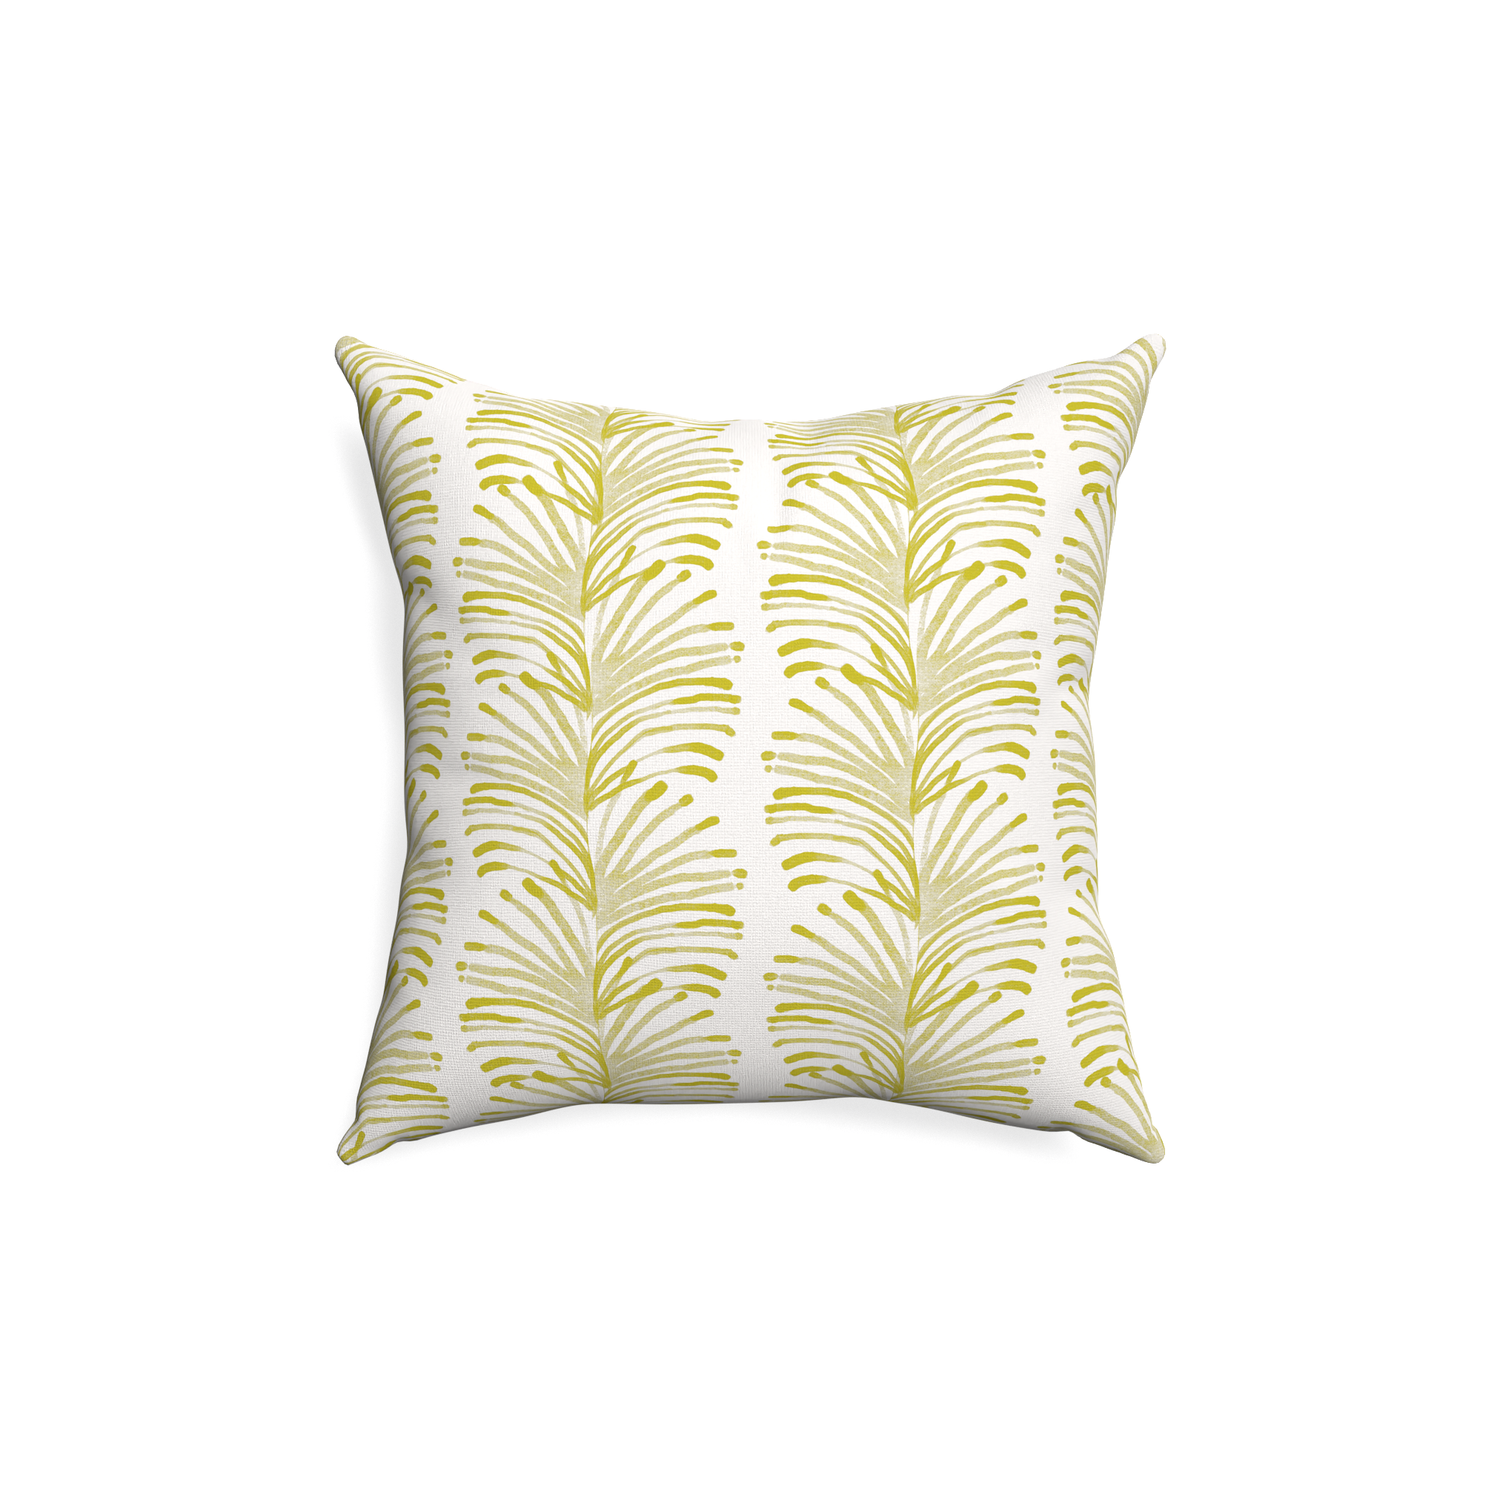 18-square emma chartreuse custom yellow stripe chartreusepillow with none on white background